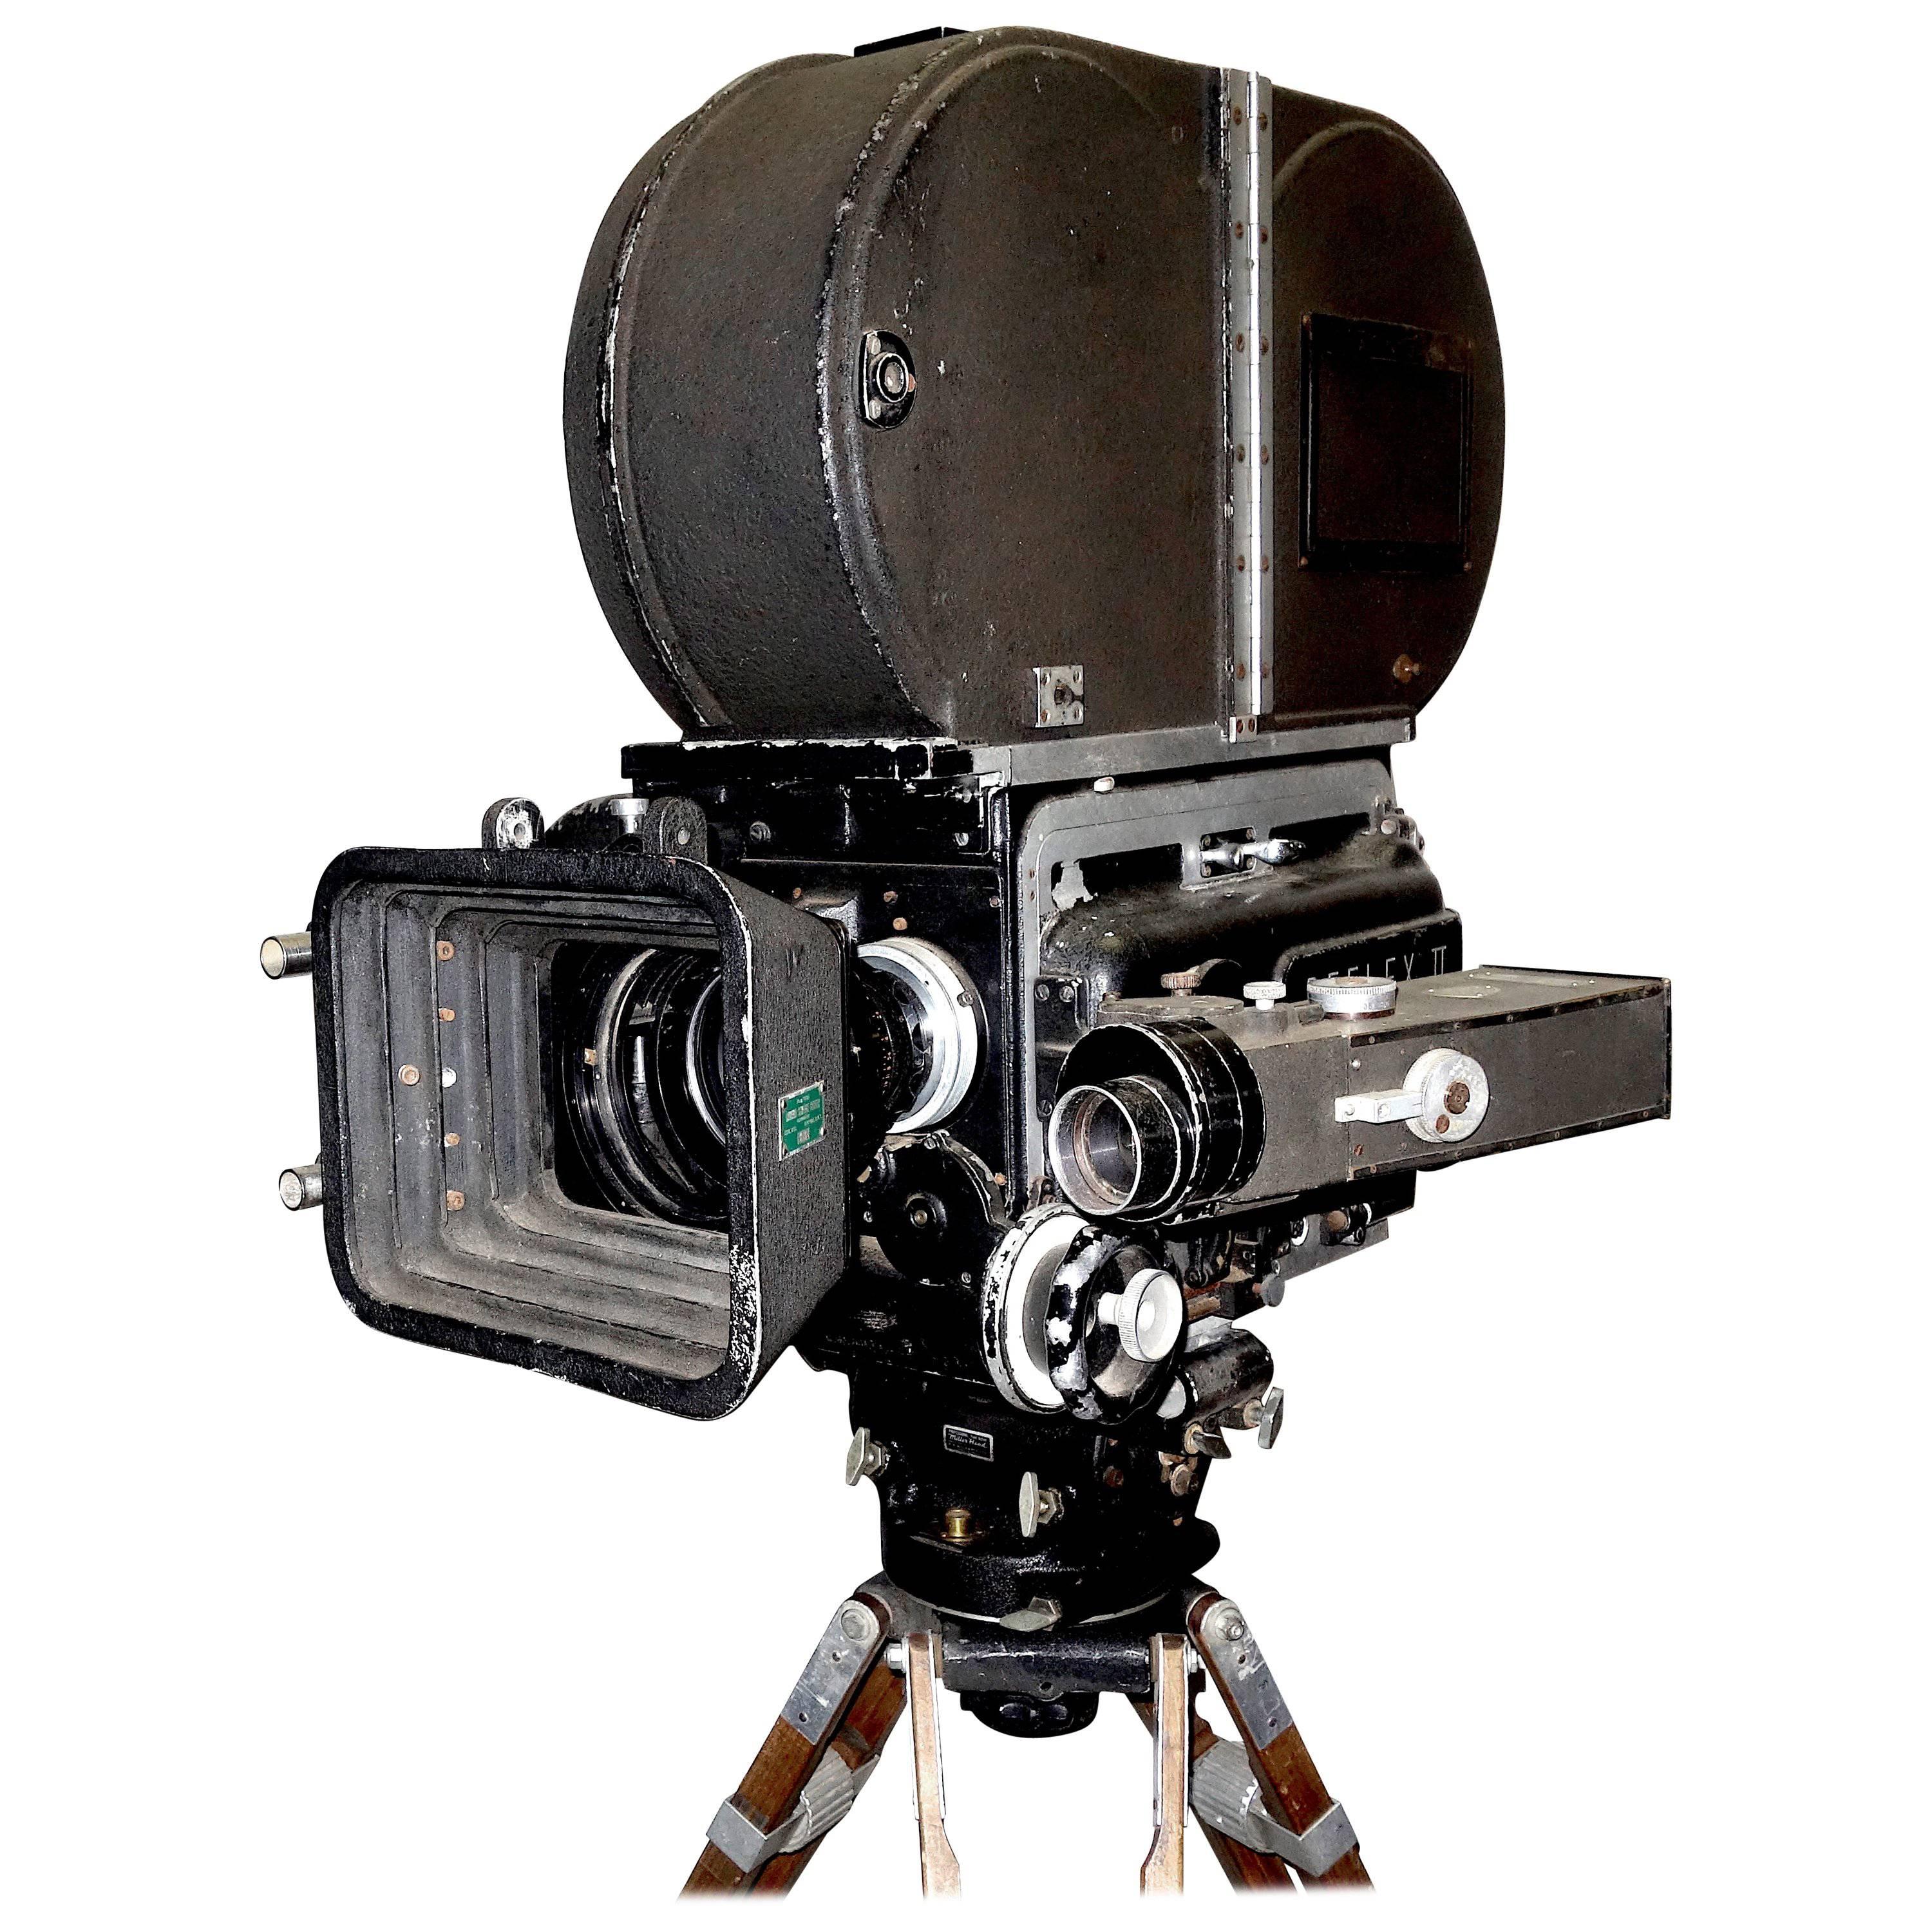 Mitchell BNCR Iconic Camera Blimp Total Sculpture circa 1950s, on Vintage Tripod For Sale